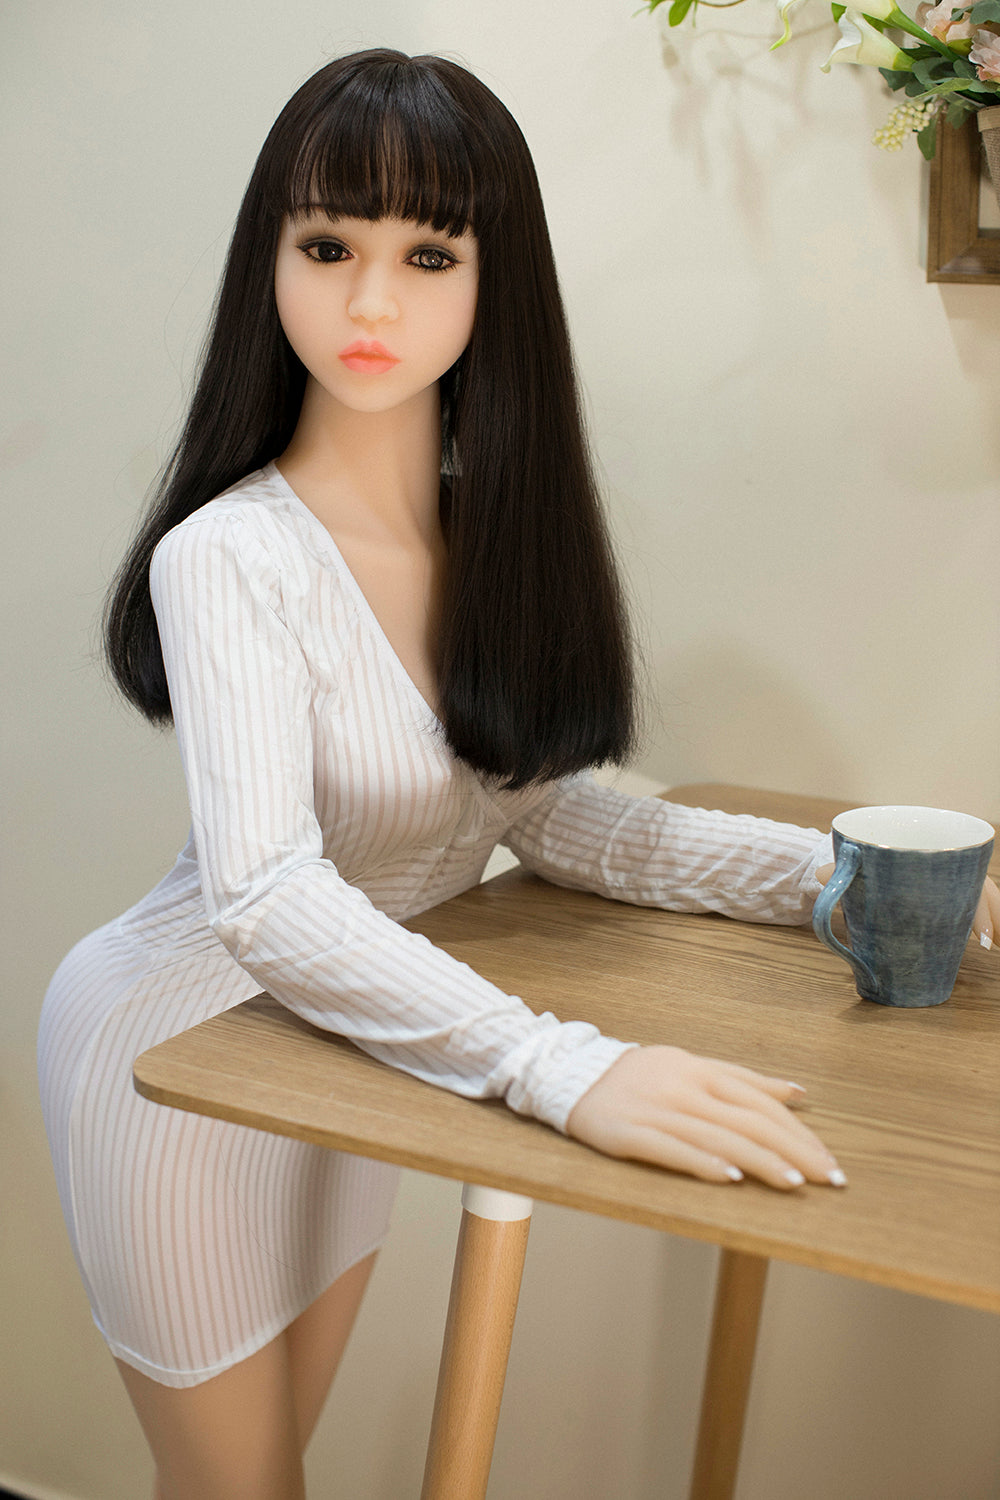 US Stock - Beatrice 158CM #088 Head Cute TPE Sex Doll Realistic Small Breasts Love Doll